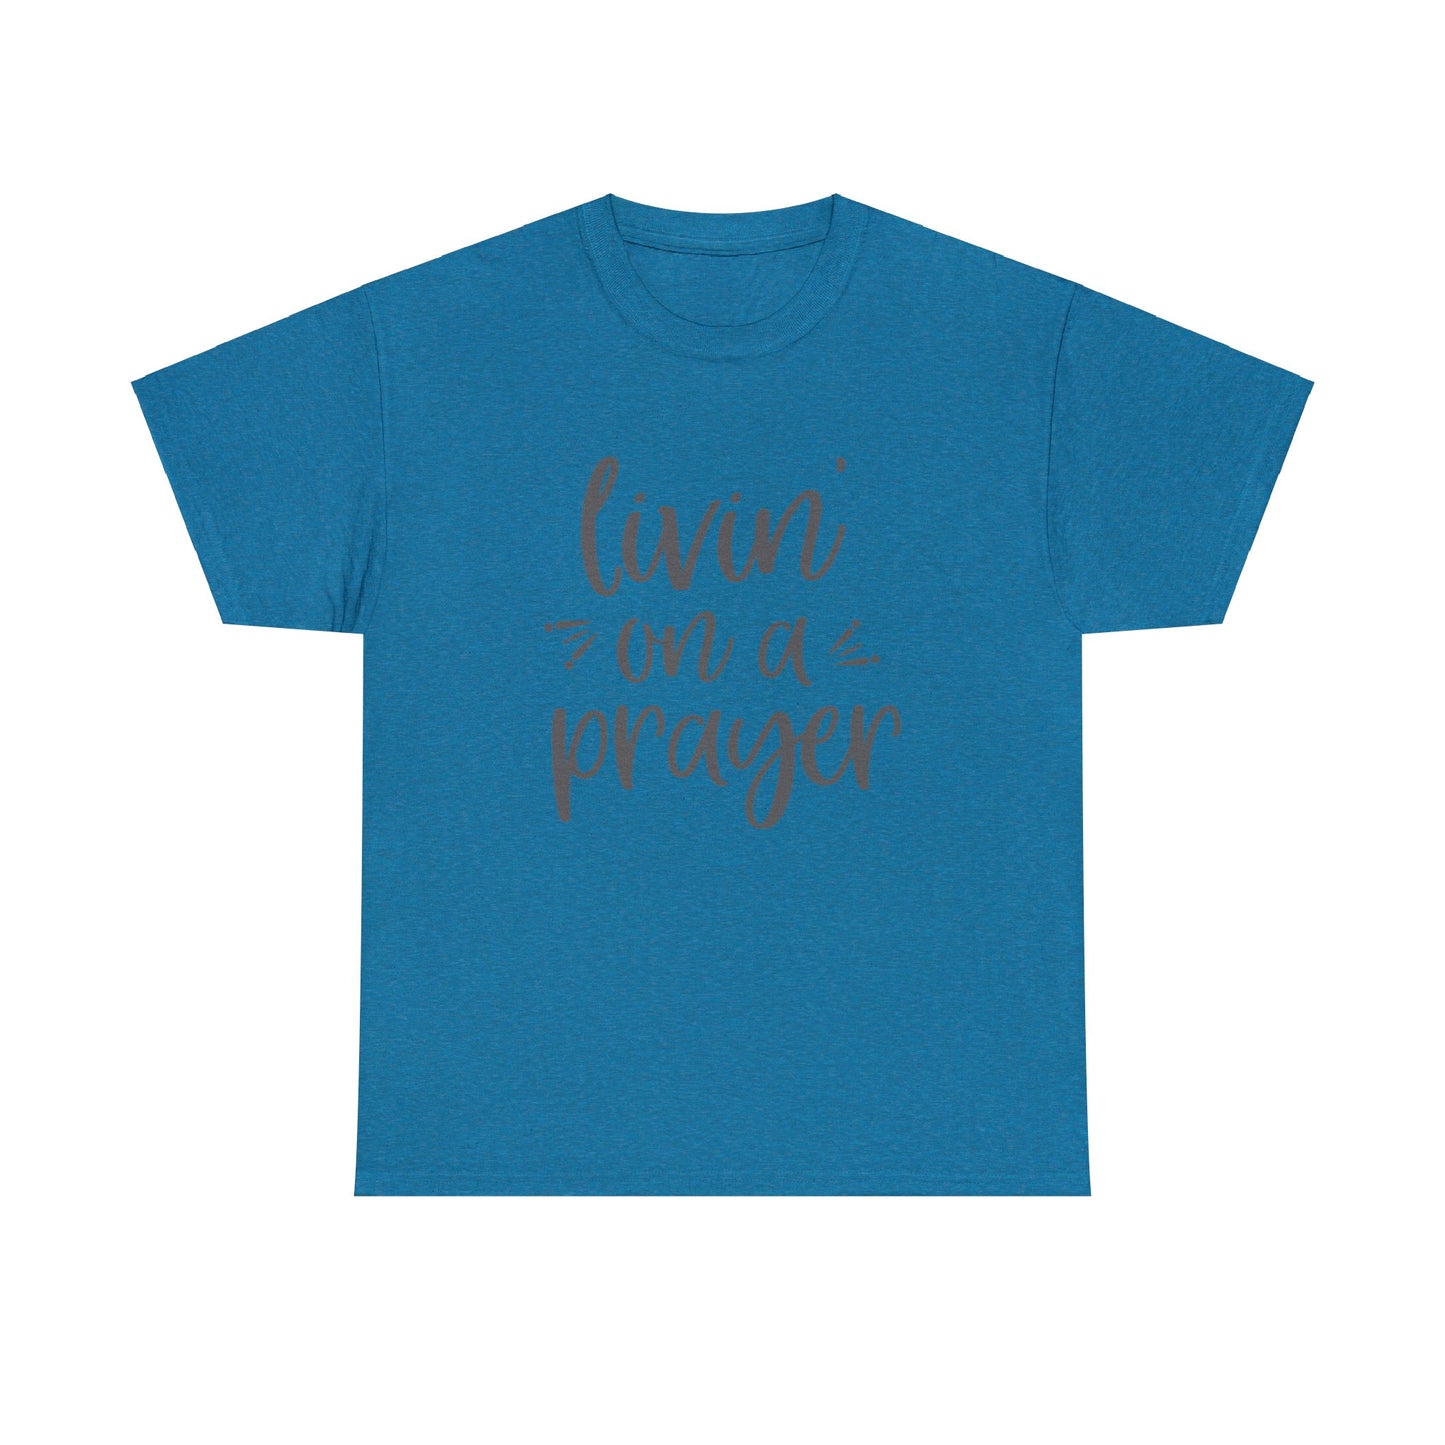 "Livin' On A Prayer" T-Shirt - Weave Got Gifts - Unique Gifts You Won’t Find Anywhere Else!